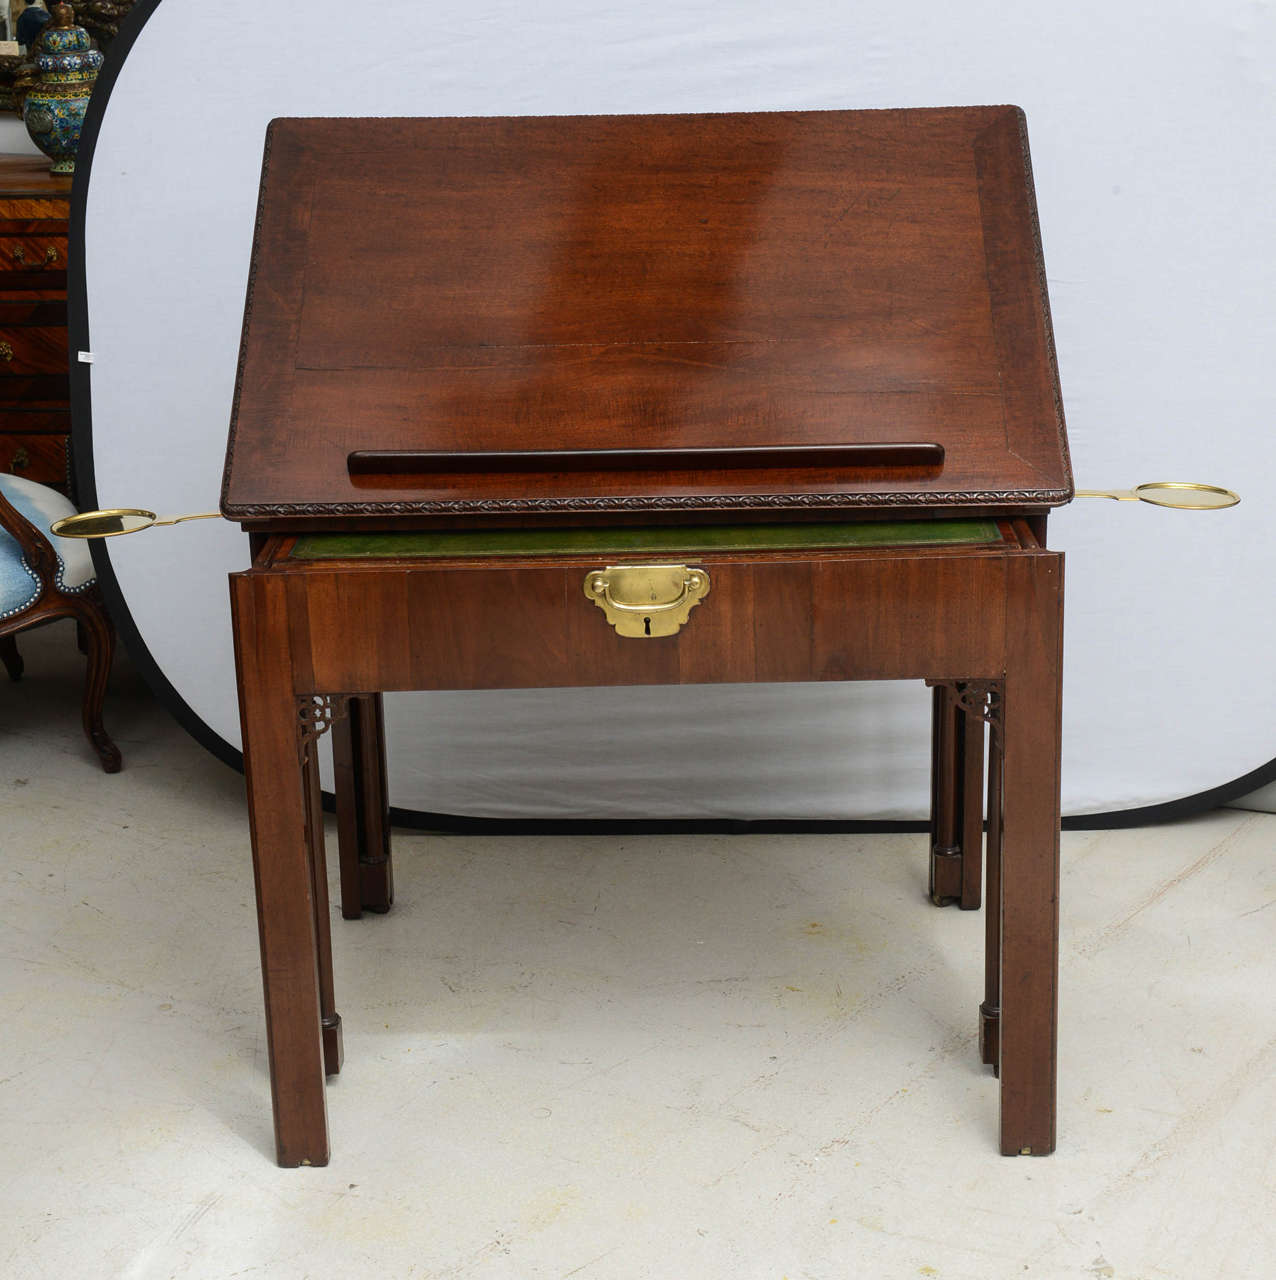 Very fine Georgian era architects desk made of mahogany. The top of the table is adjustable to various plane angles, while the green leather writing portion slides out. When open there is a hidden side compartment which neatly nestles into the side